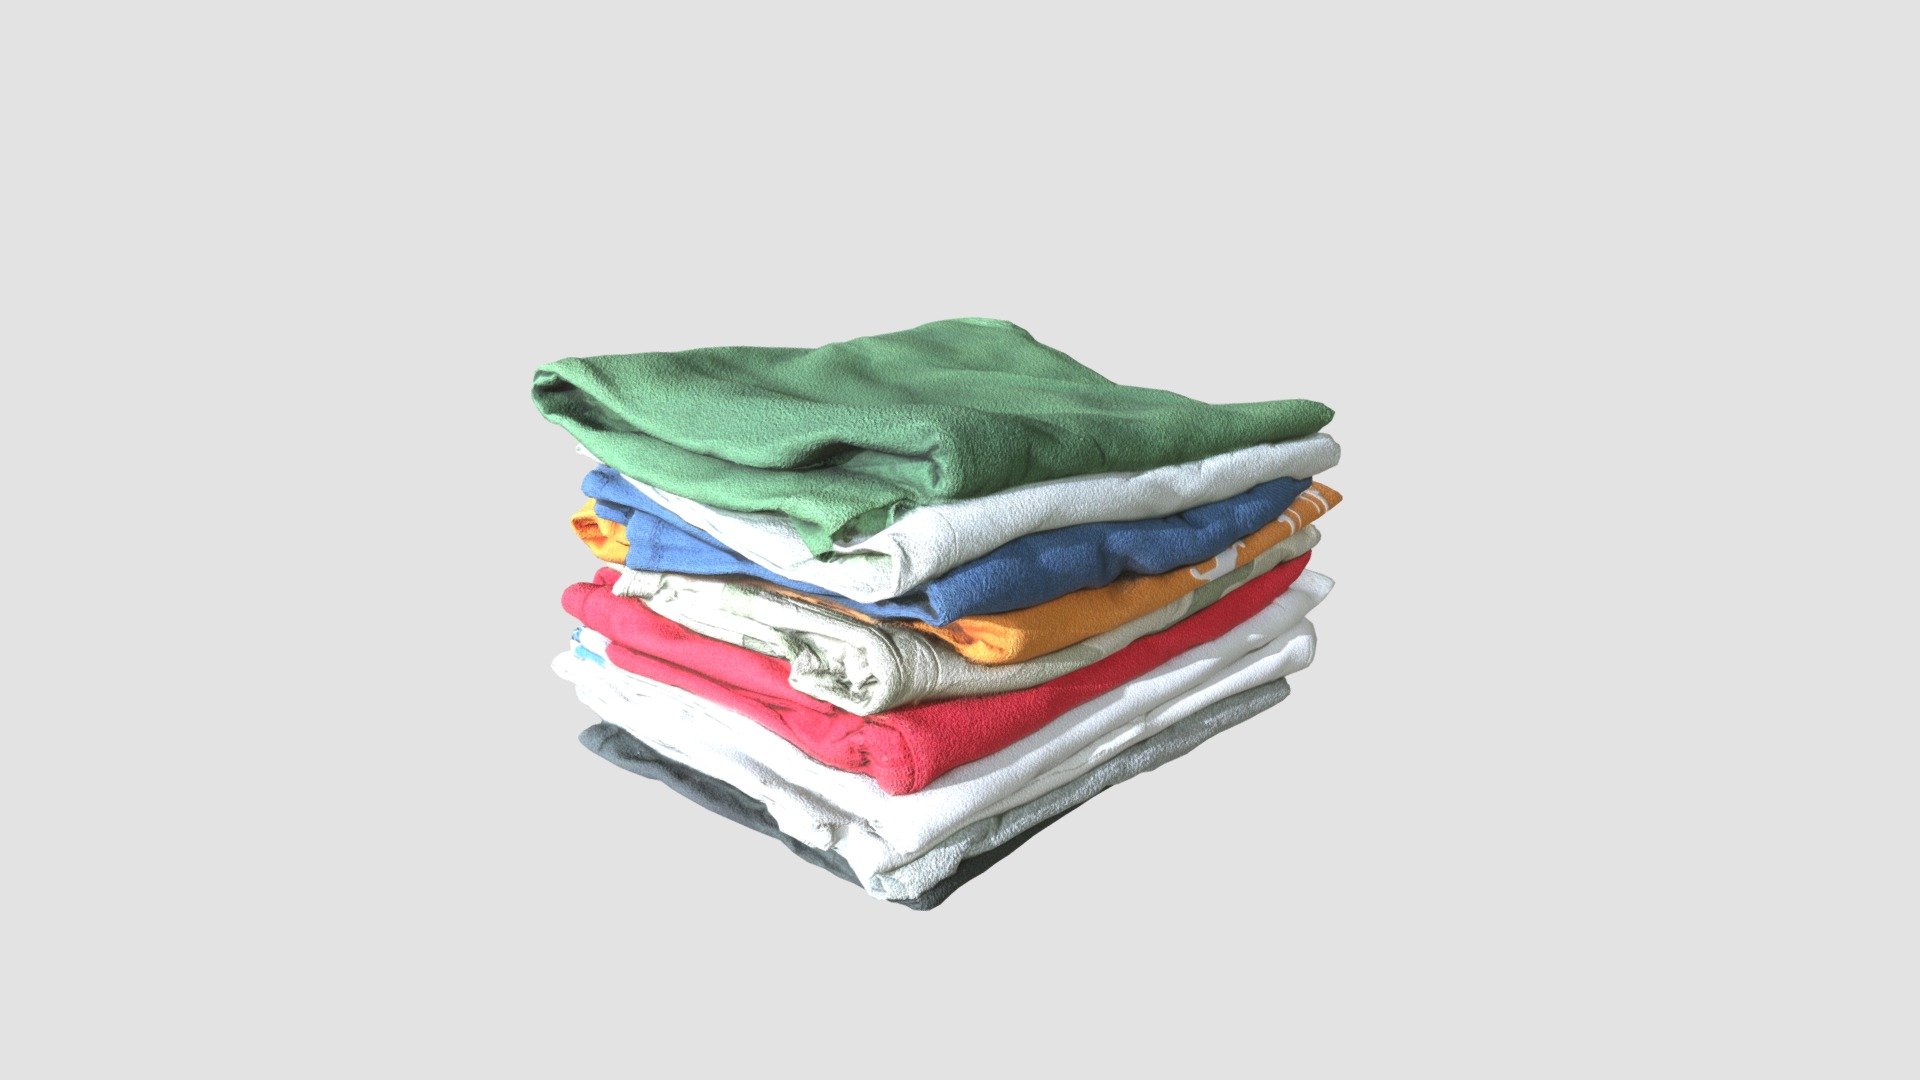 Highly detailed 3d model of clothes with all textures, shaders and materials. It is ready to use, just put it into your scene 3d model